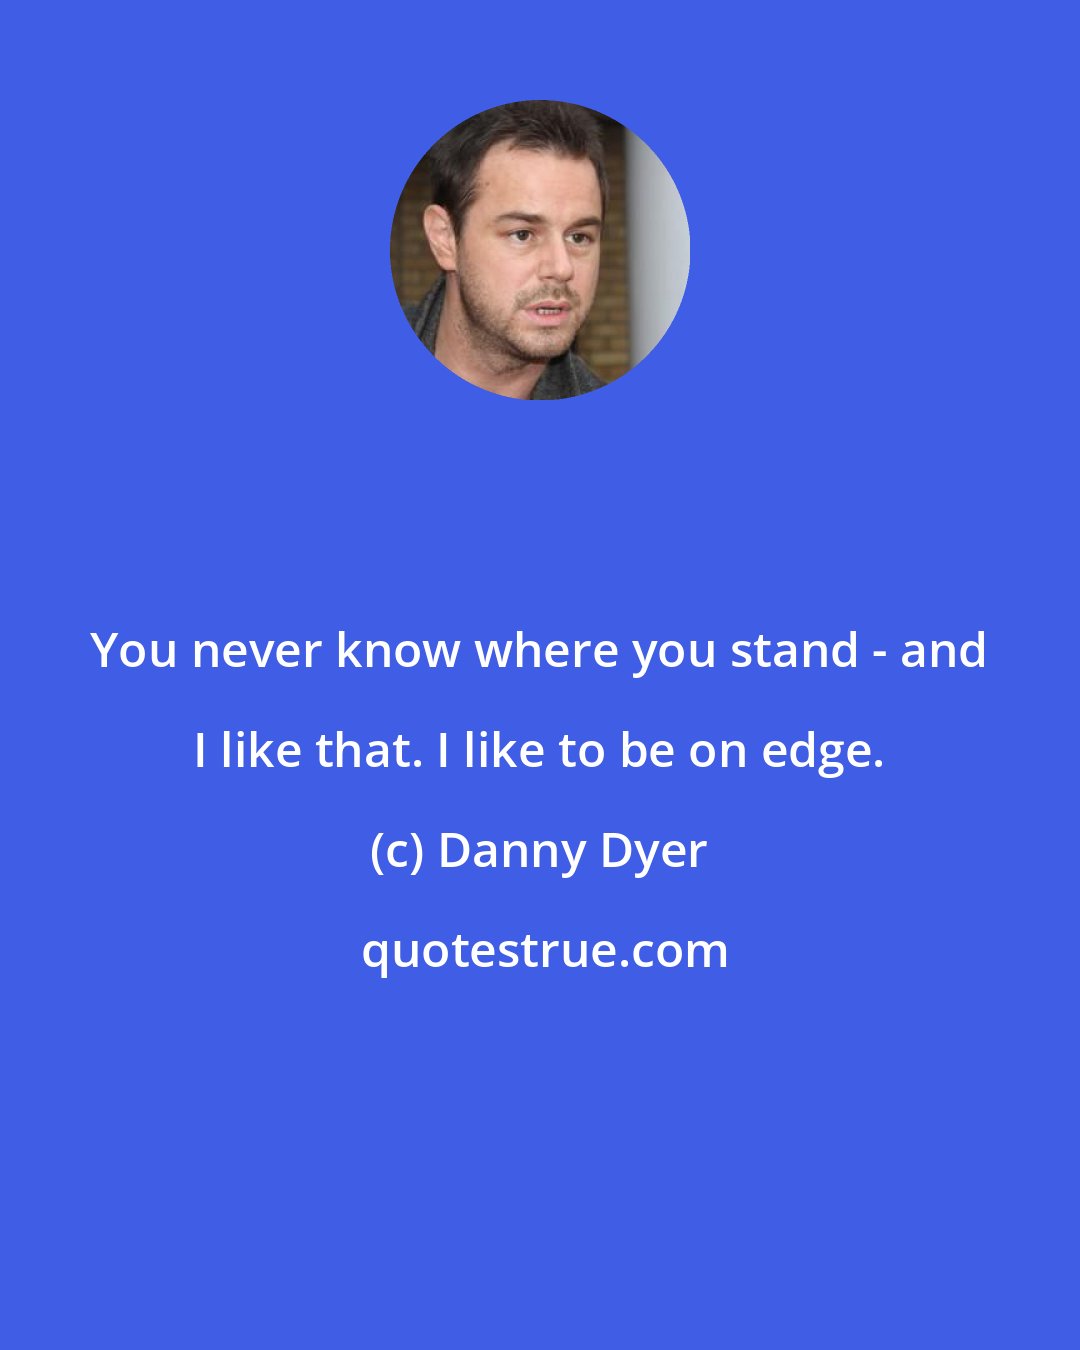 Danny Dyer: You never know where you stand - and I like that. I like to be on edge.